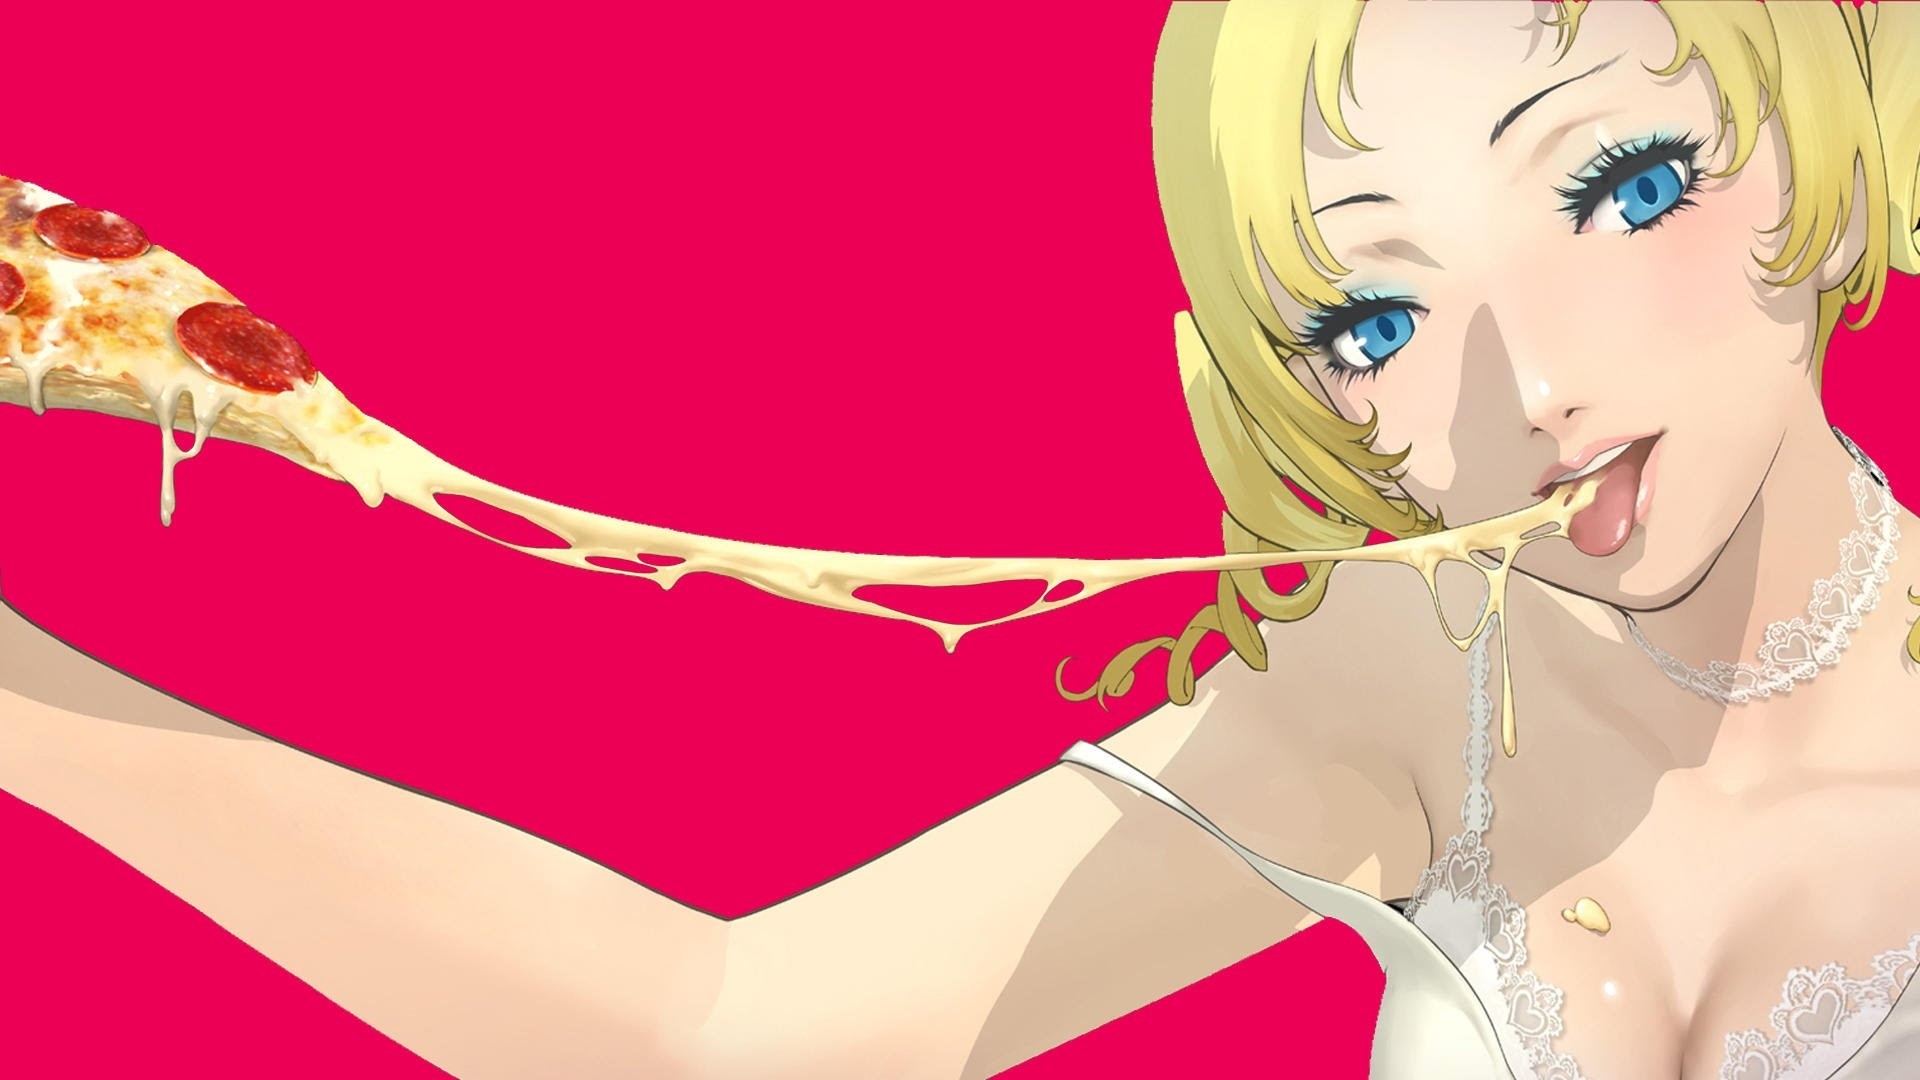 Catherine Video Game Wallpaper.